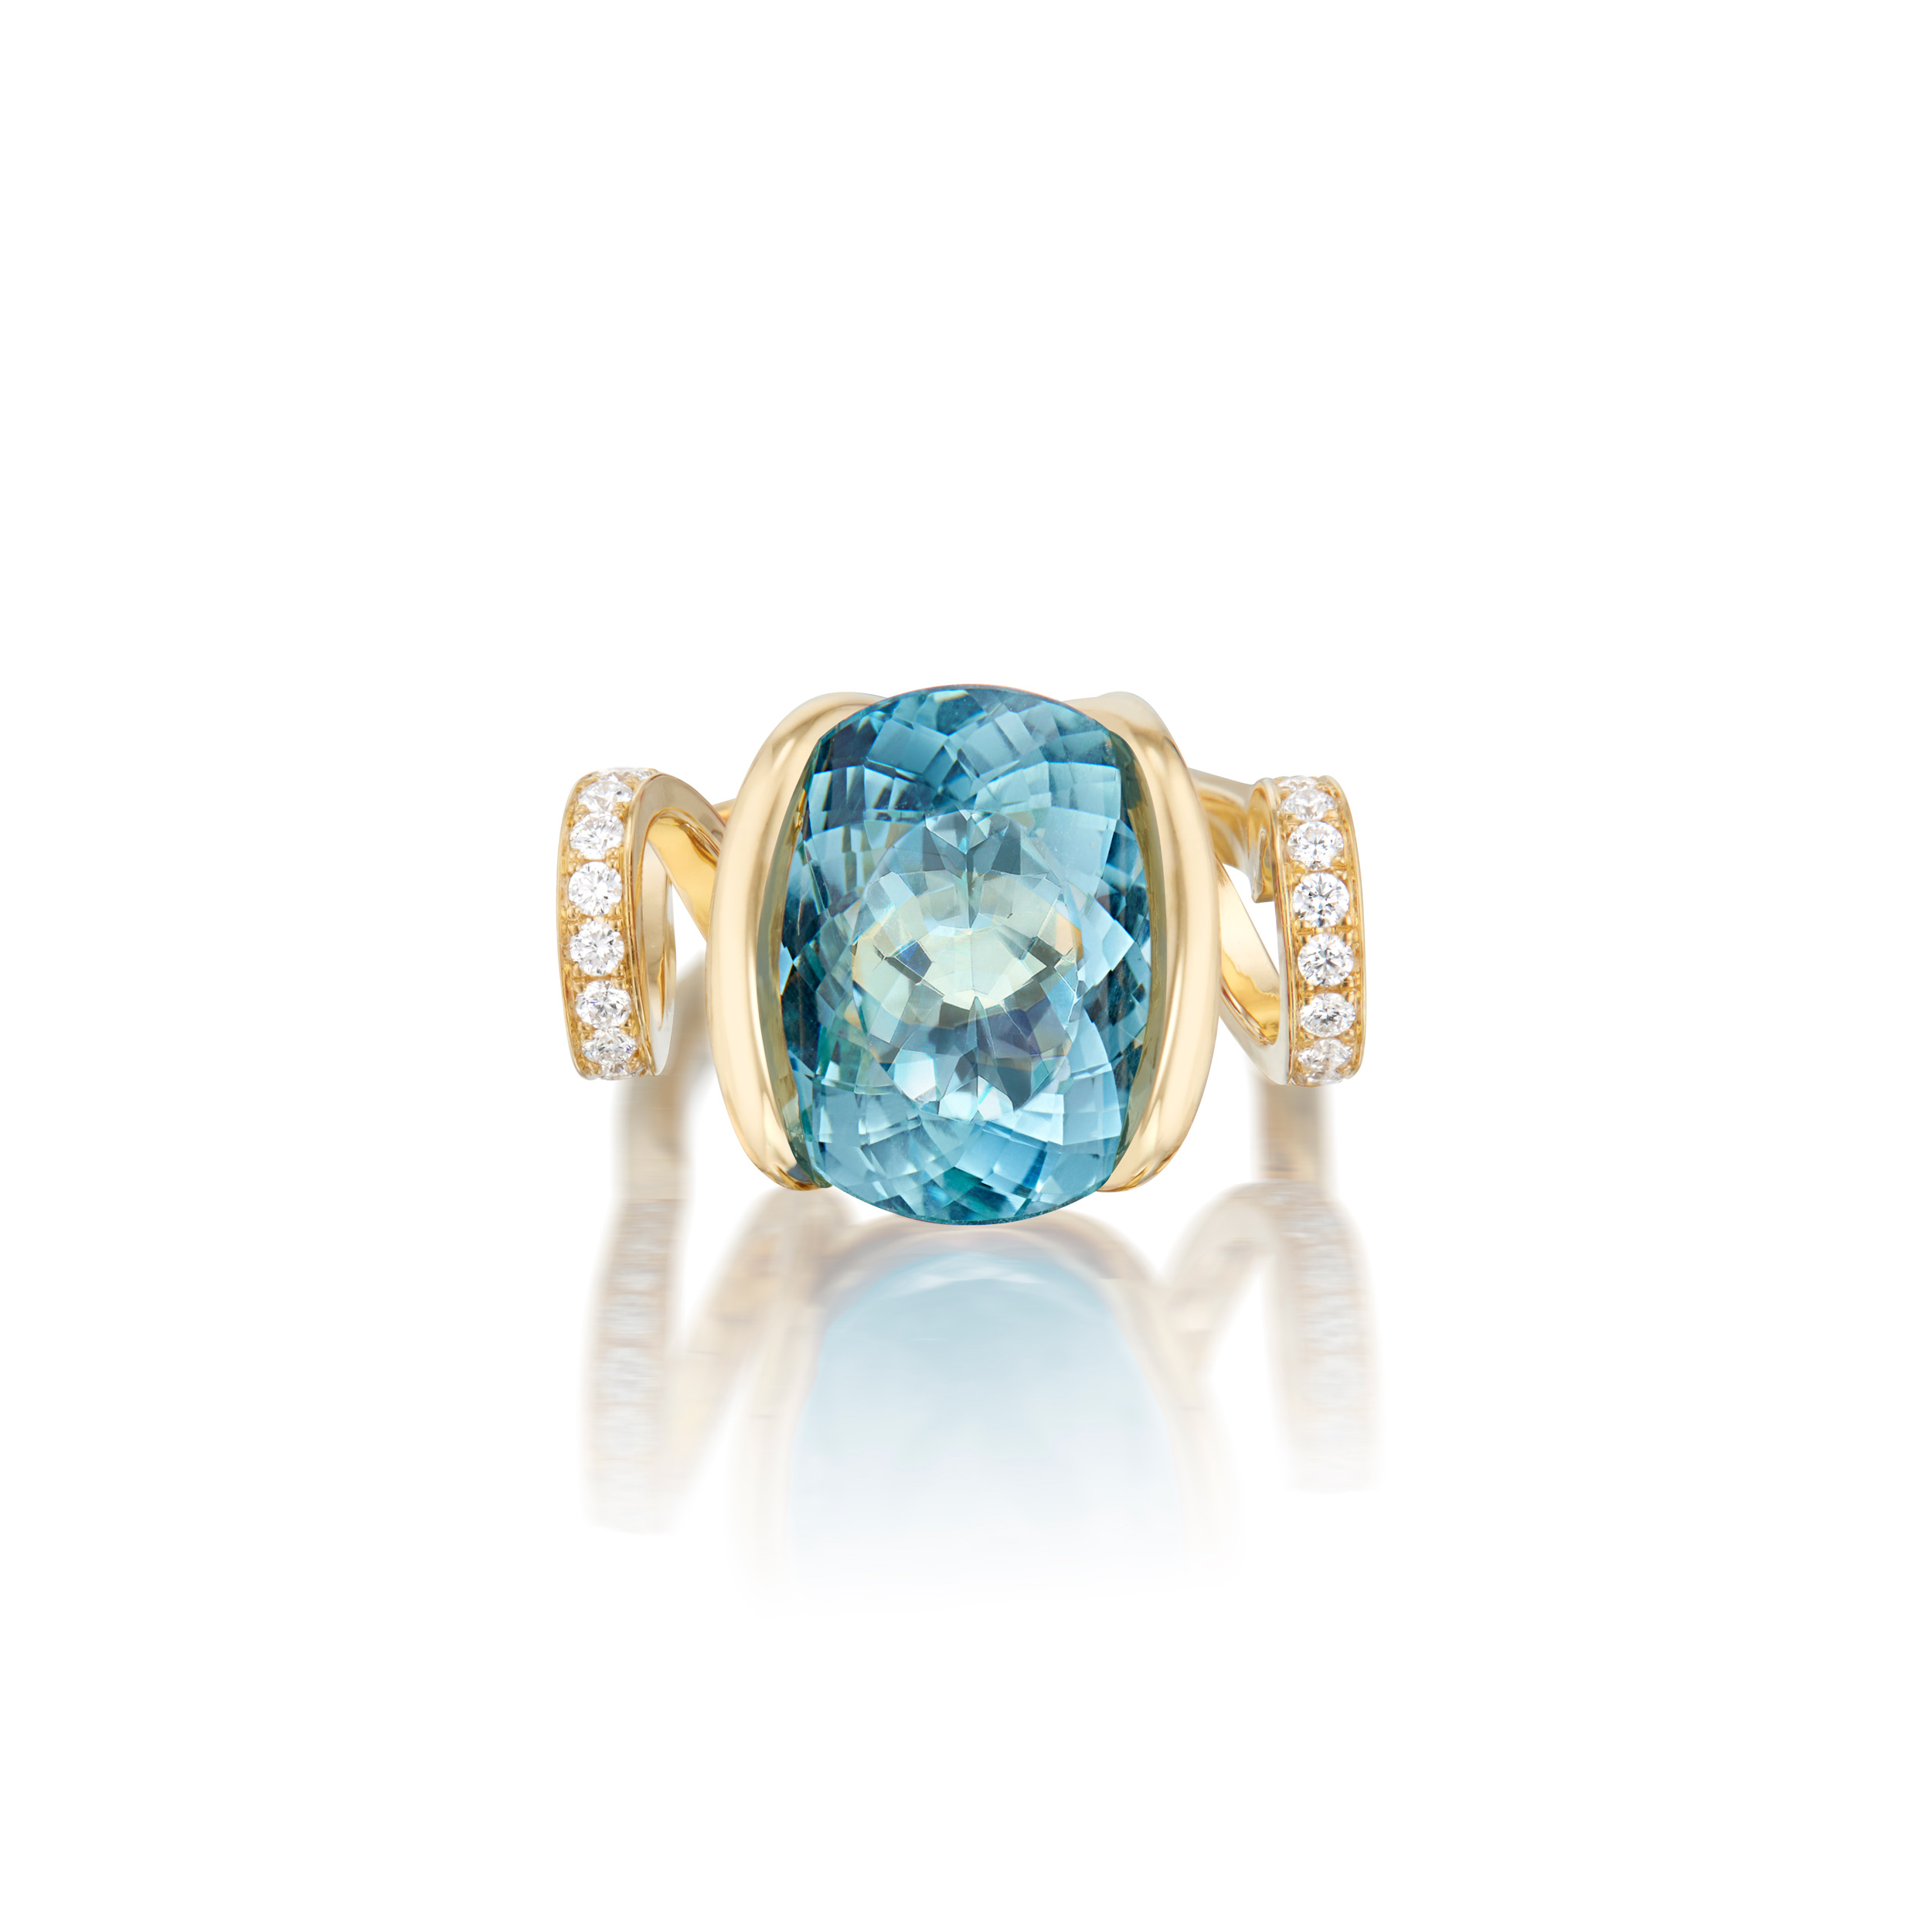 Front view of the Ice Curl Ring's Aquamarine center stone from Renisis by designer, Sardwell. It is made of 18K yellow gold with aquamarine and pavé diamonds. Its unique design includes a curled gold shape and setting.